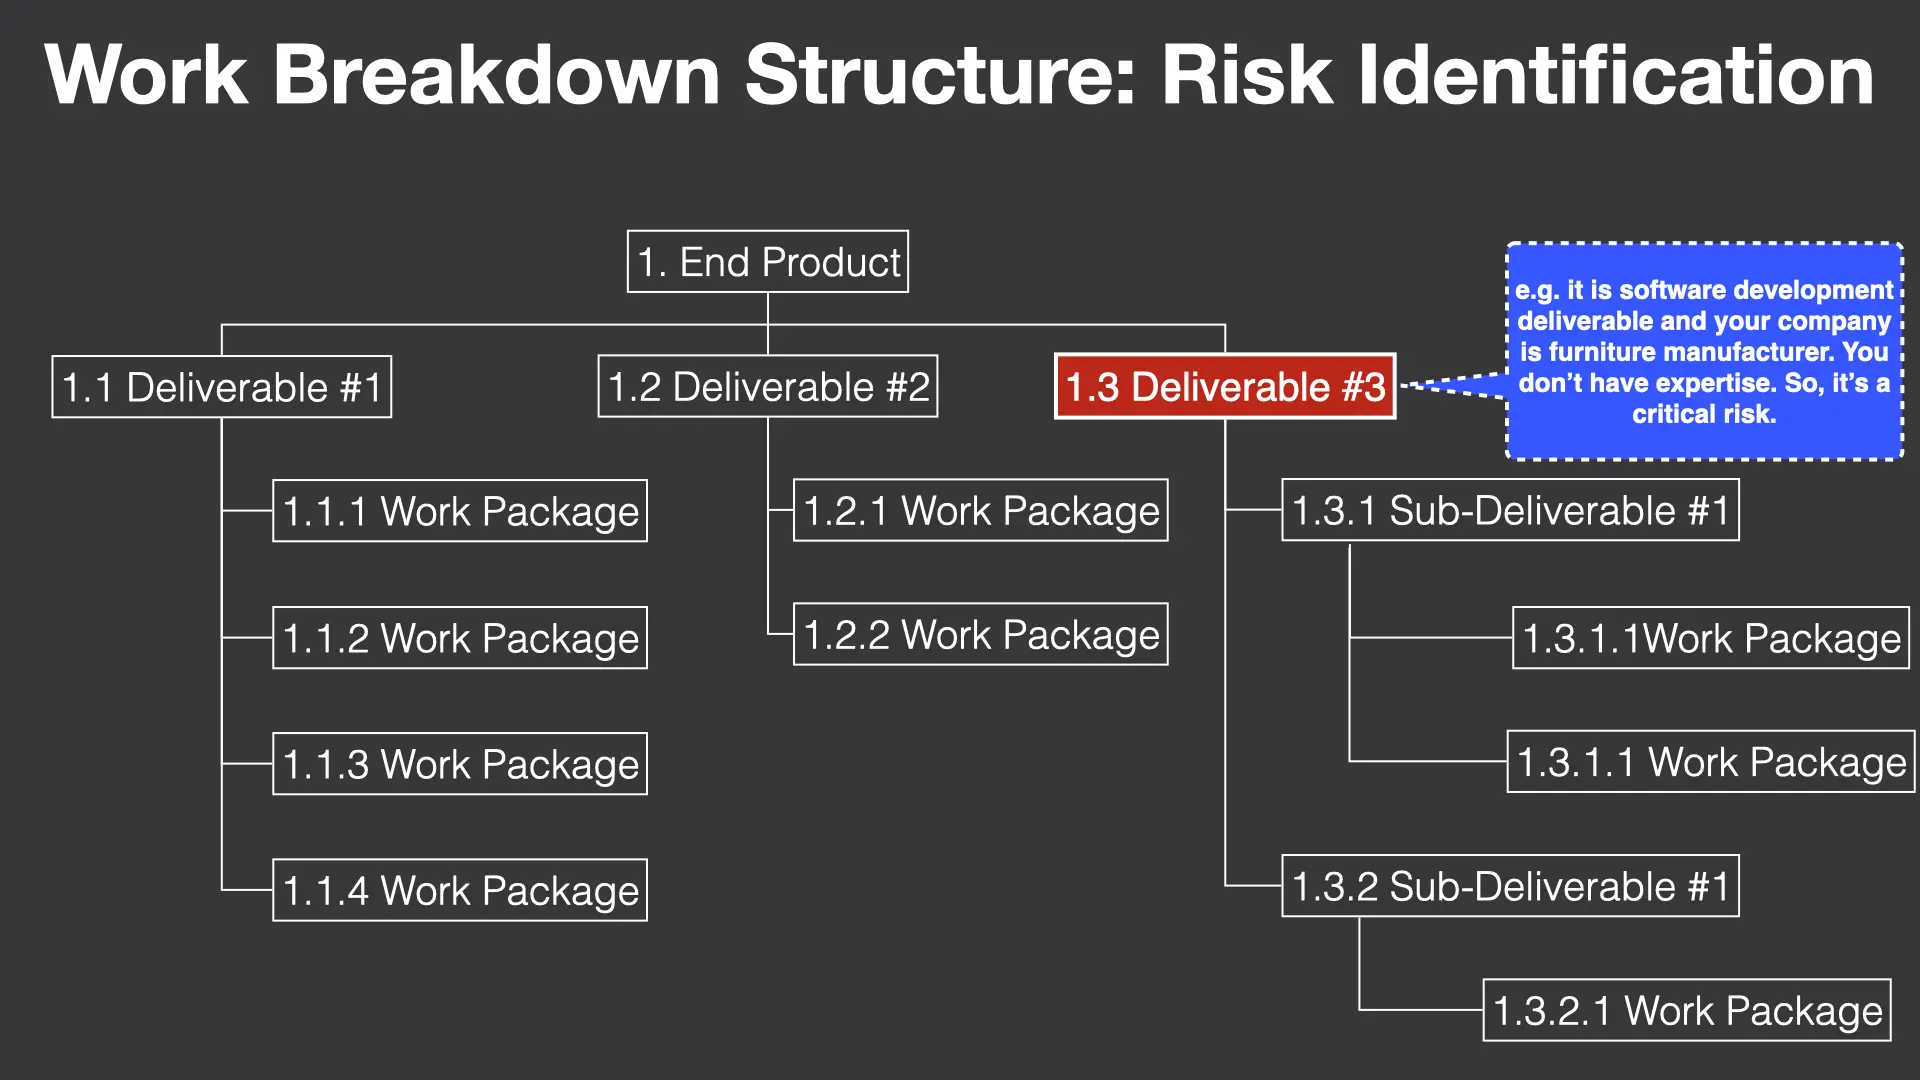 An example of risk identification by analyzing work breakdown structure elements